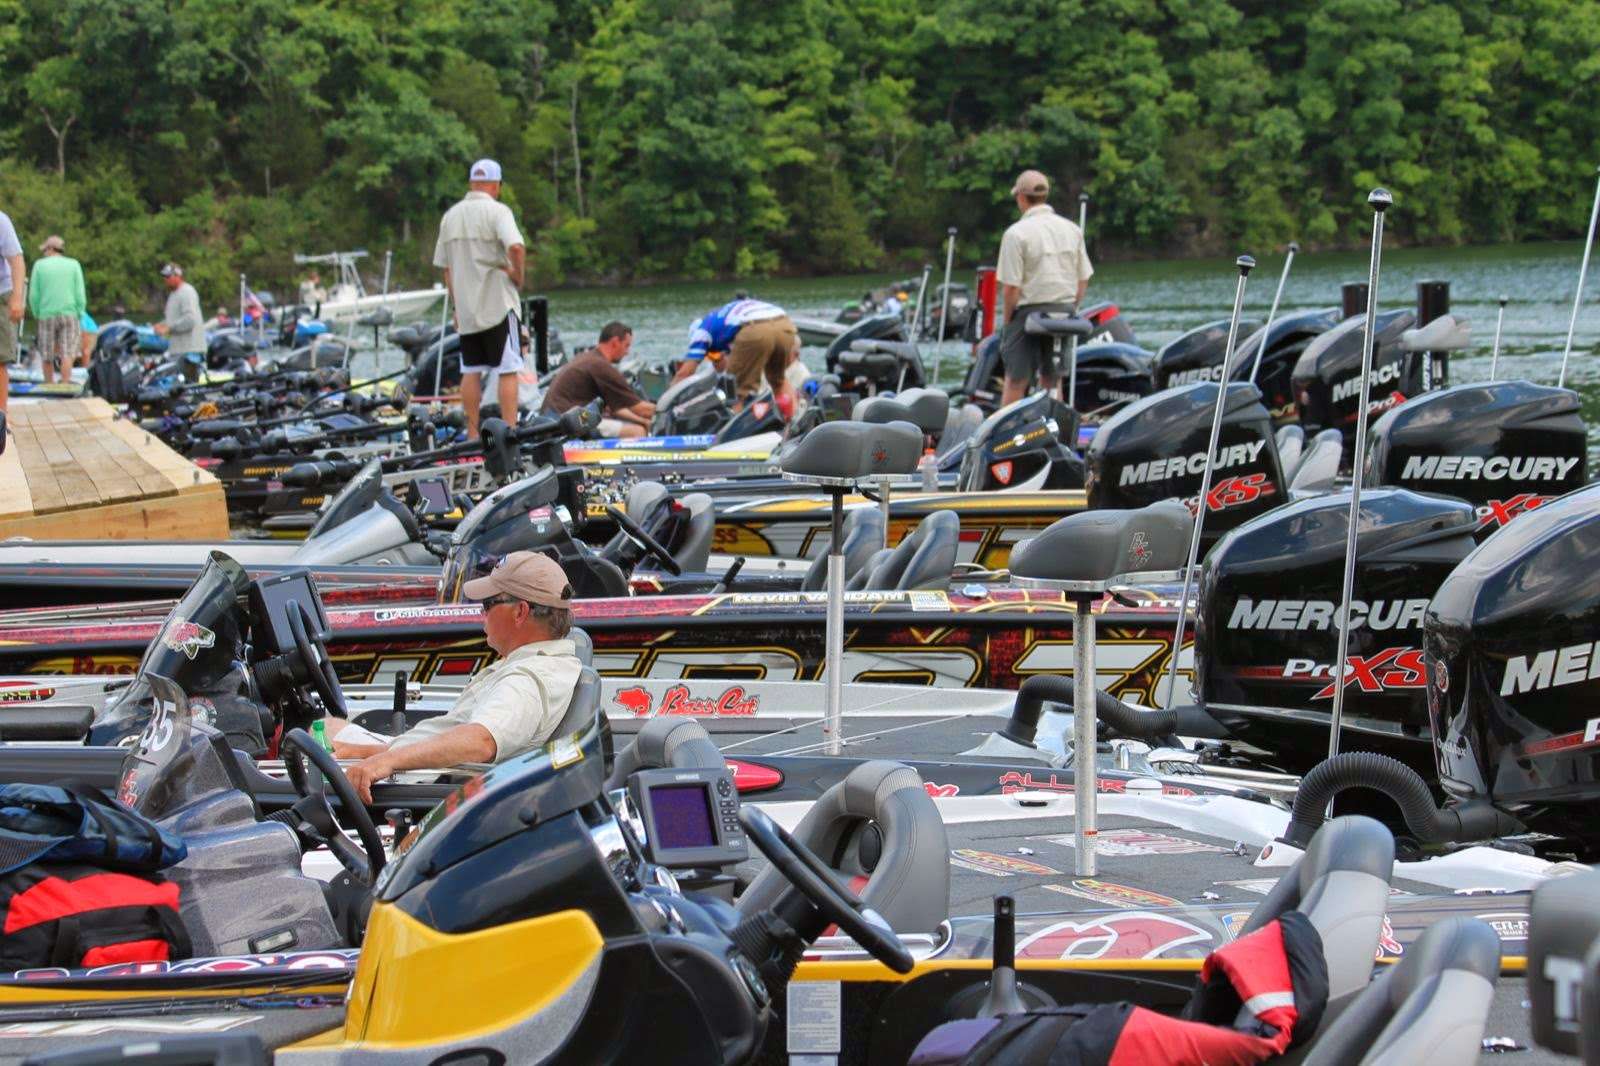 I'm not sure what you call a mess of Bass boats like this, but that's probably a million bucks of fiberglass rockets sitting there. BTW I would call them a 